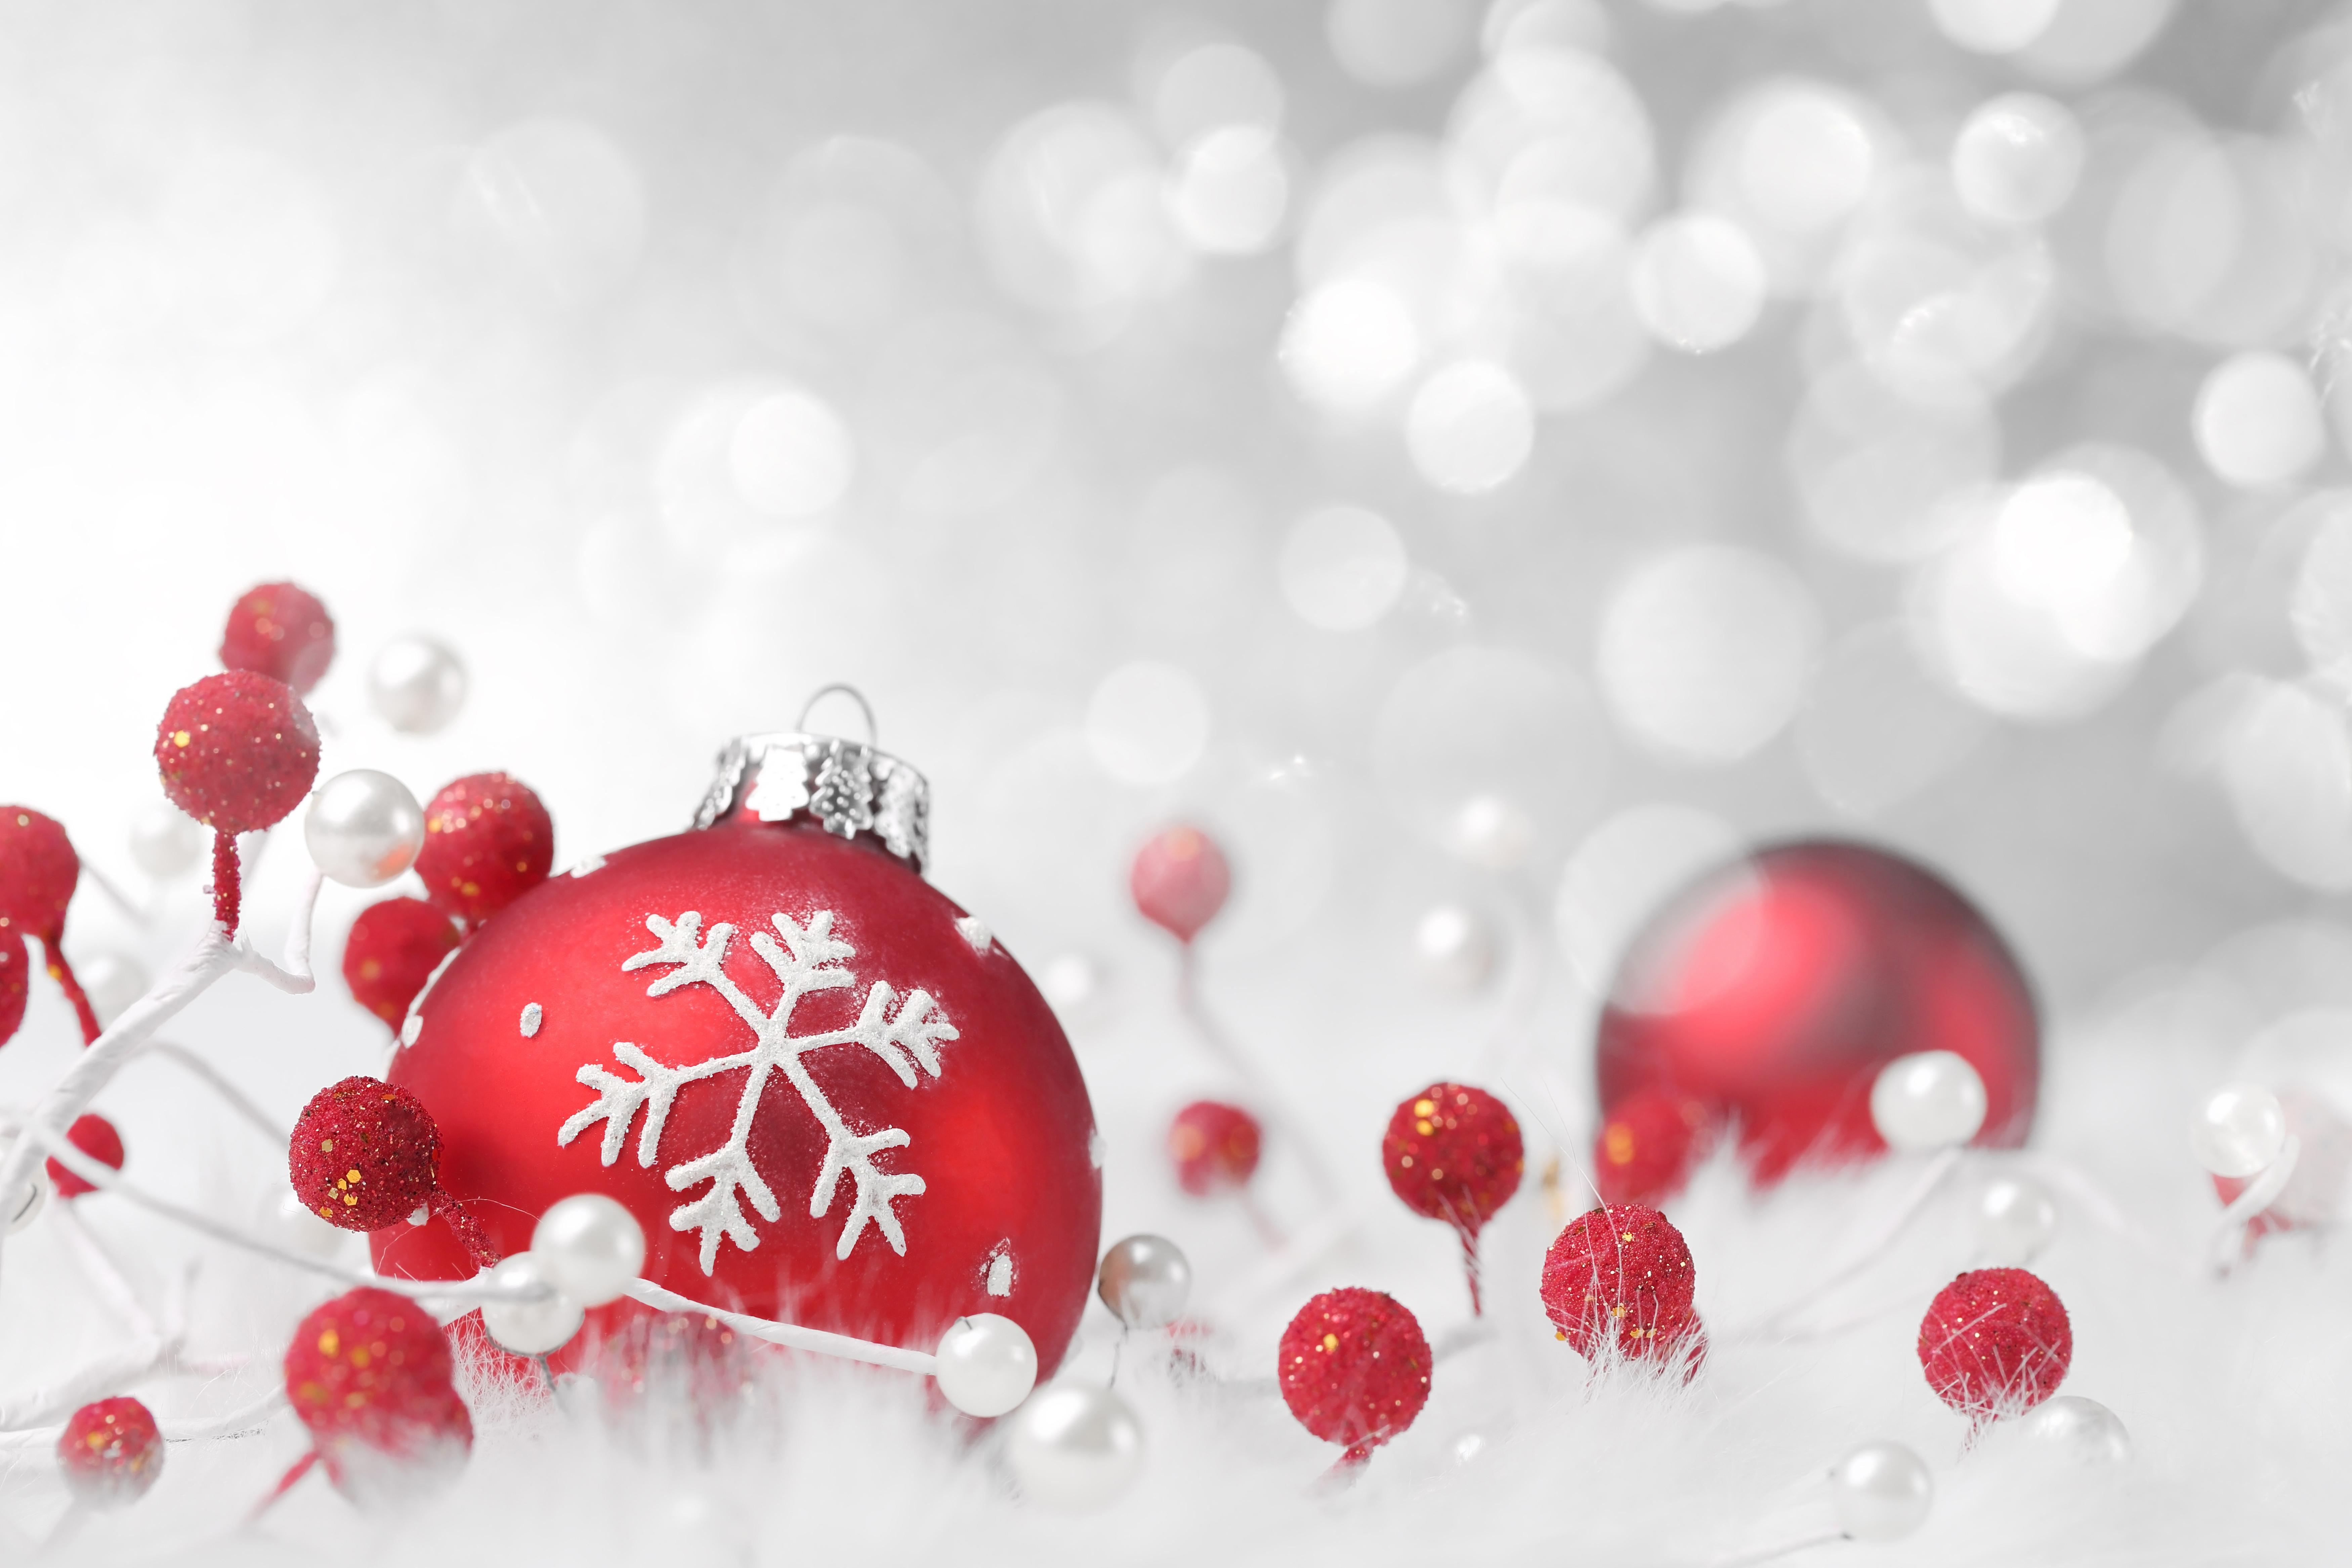 7000 x 4667 · jpeg - Red Christmas Balls Wallpapers High Quality | Download Free